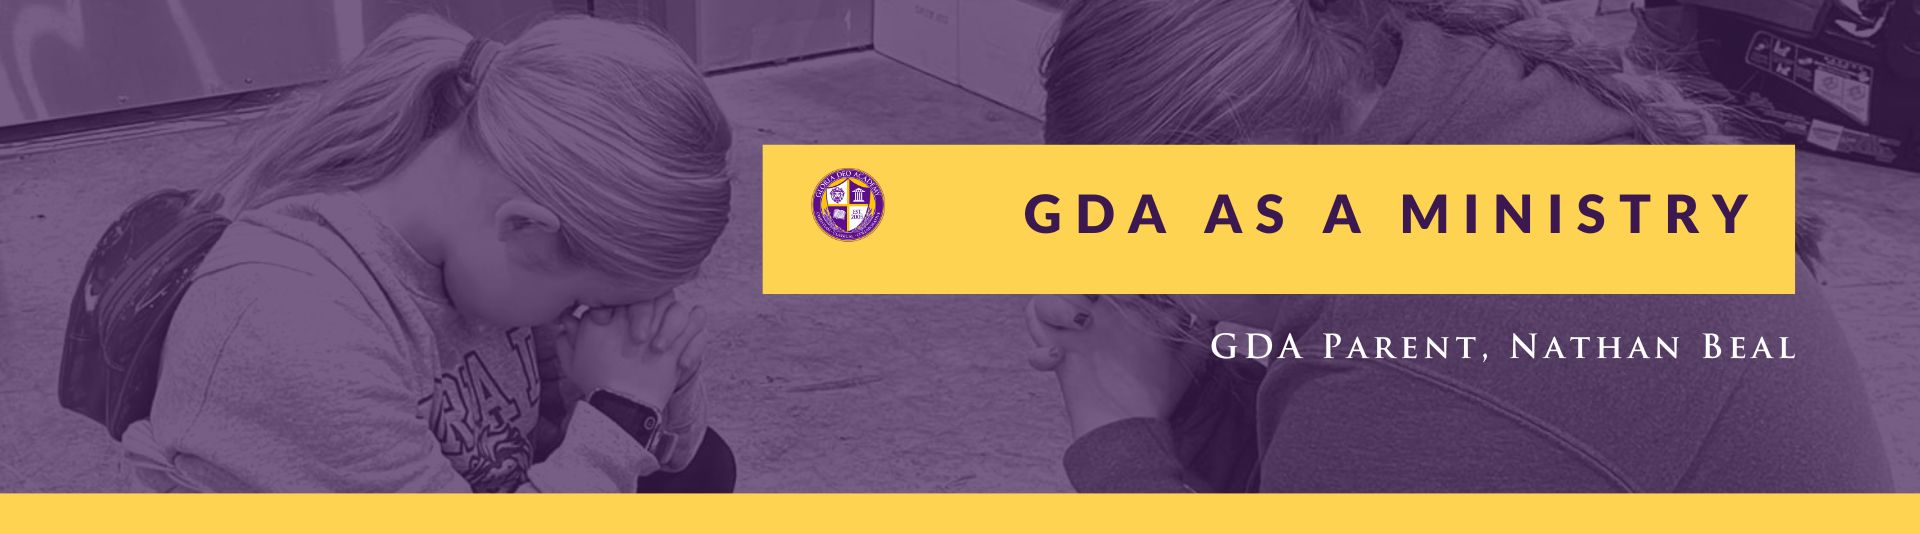 Gloria Deo Academy is a kingdom ministry. We are not a church, but we hope to serve the Church by partnering with parents to bring their children up in the nurture and admonition of the Lord.